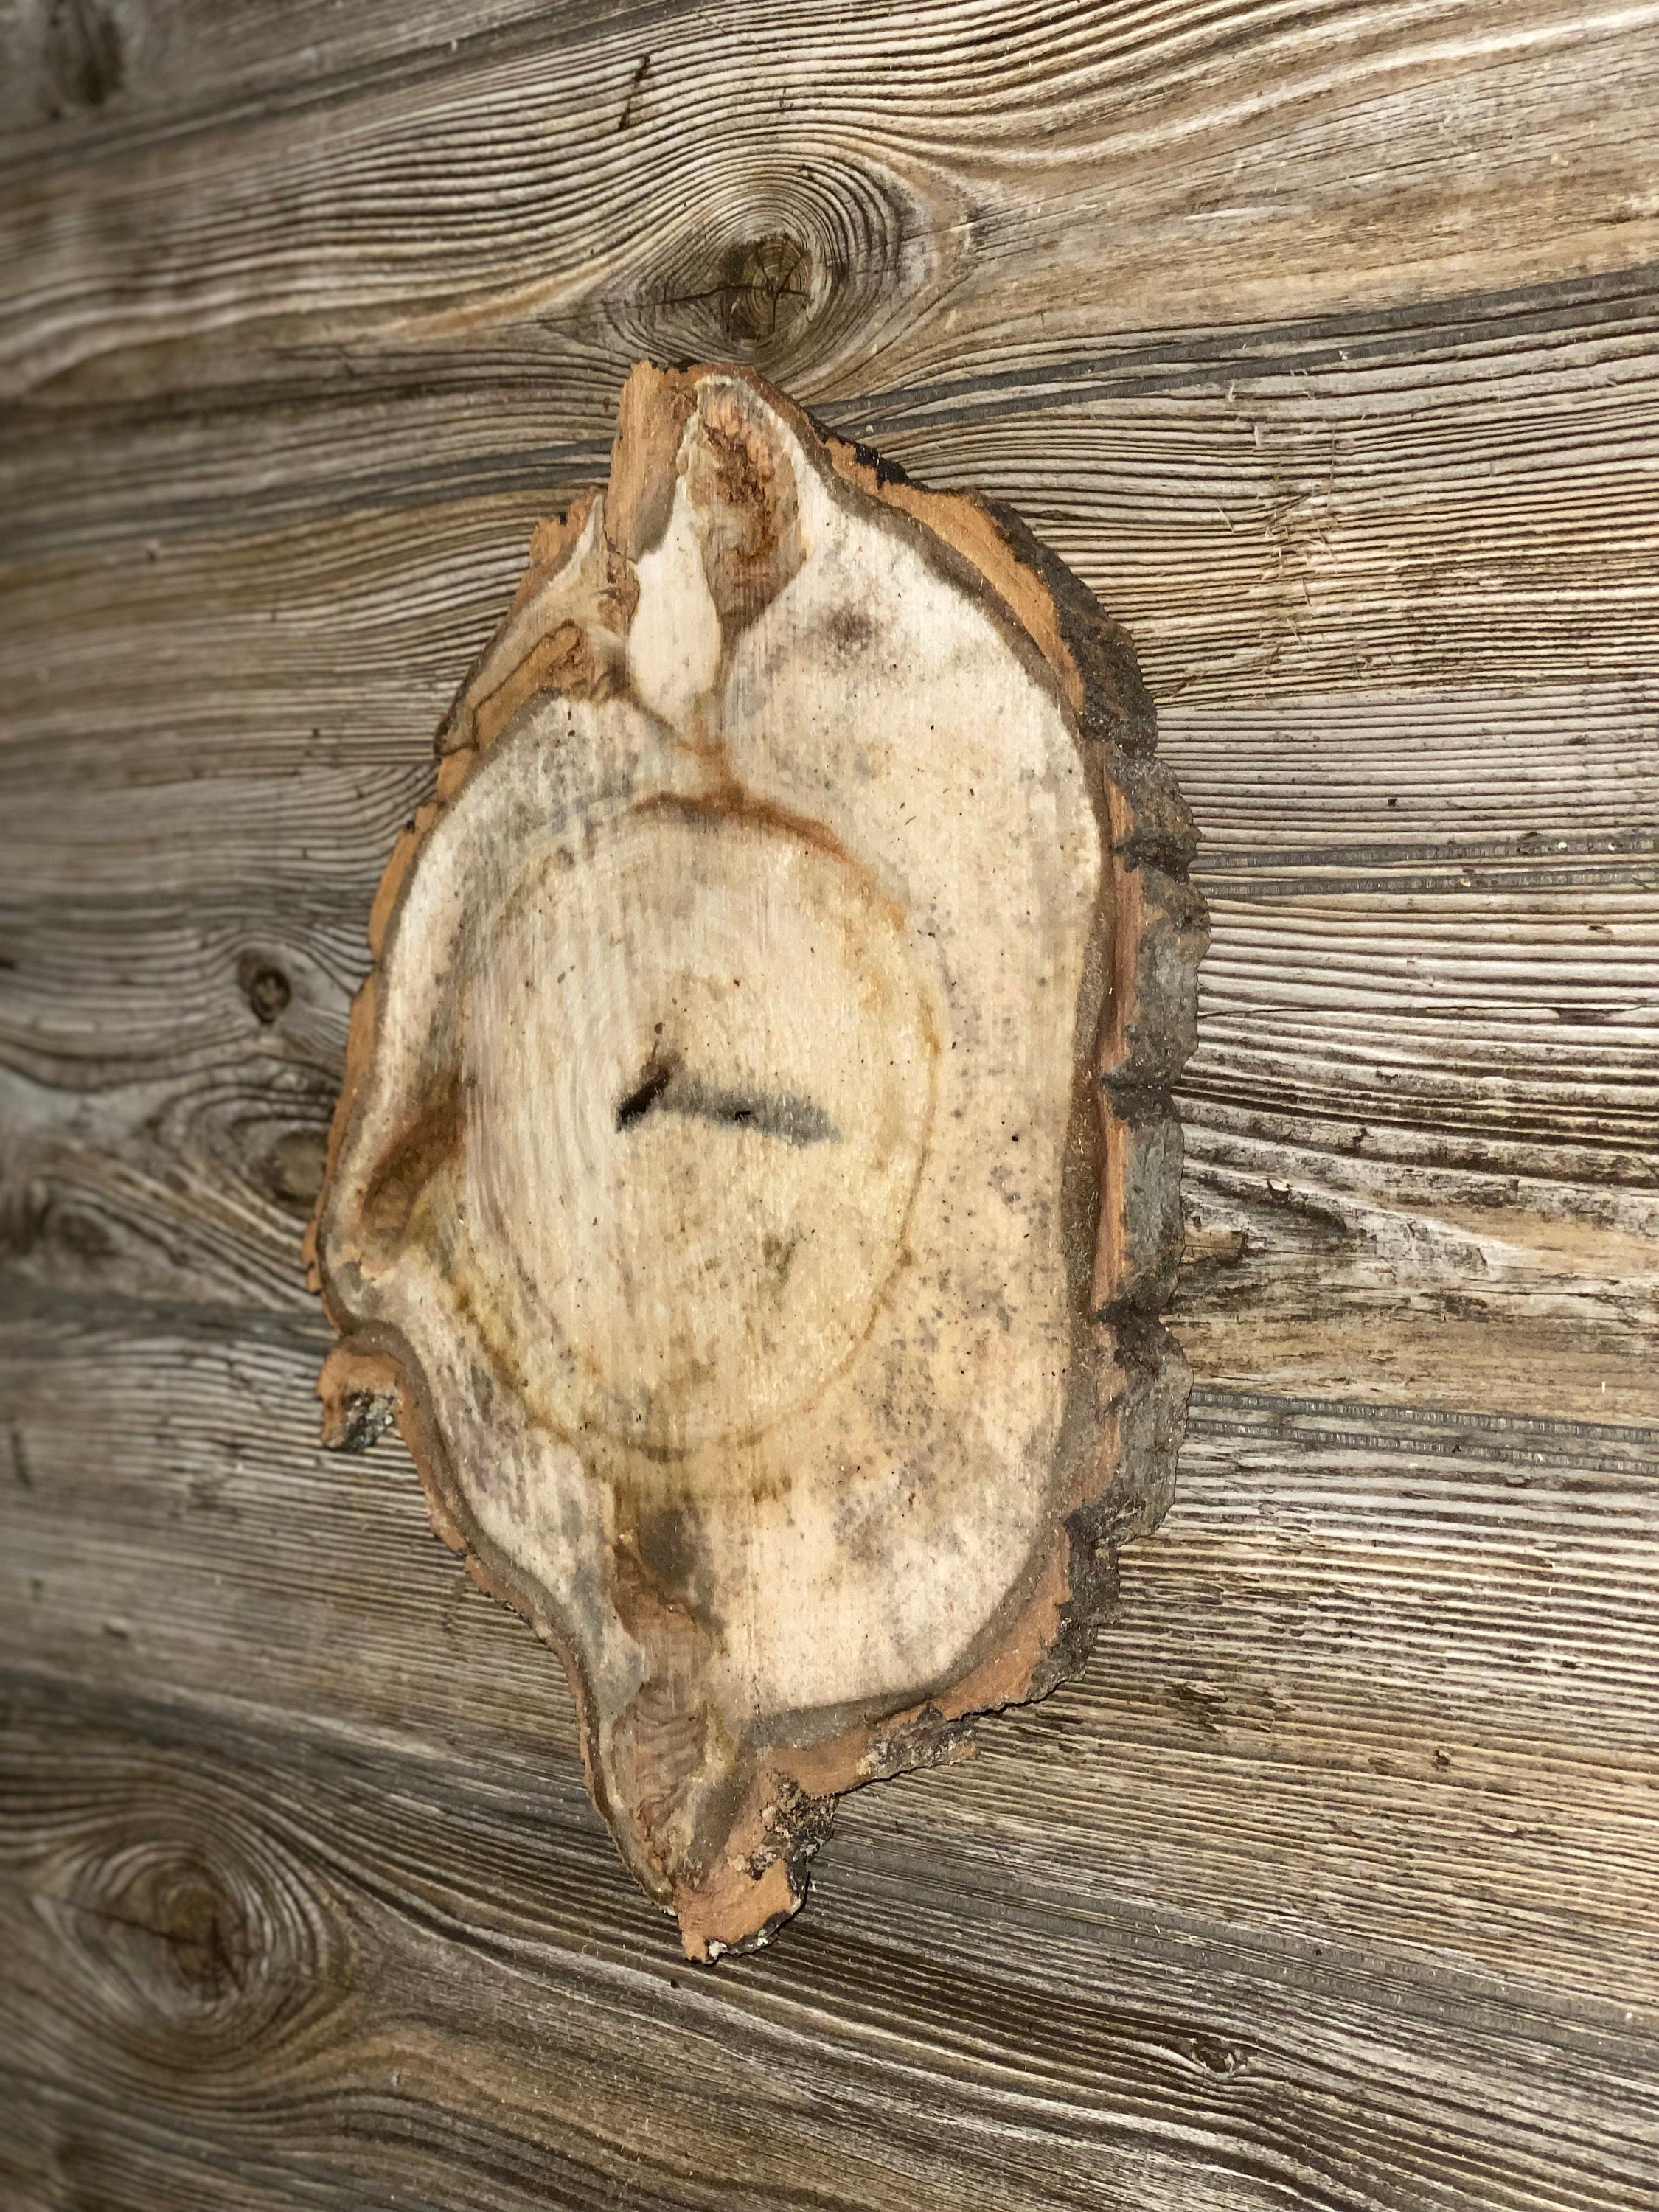 Aspen Burl Slice, Approximately 13 Inches Long by 9.5 Inches Wide and 3/4 Inches Thick